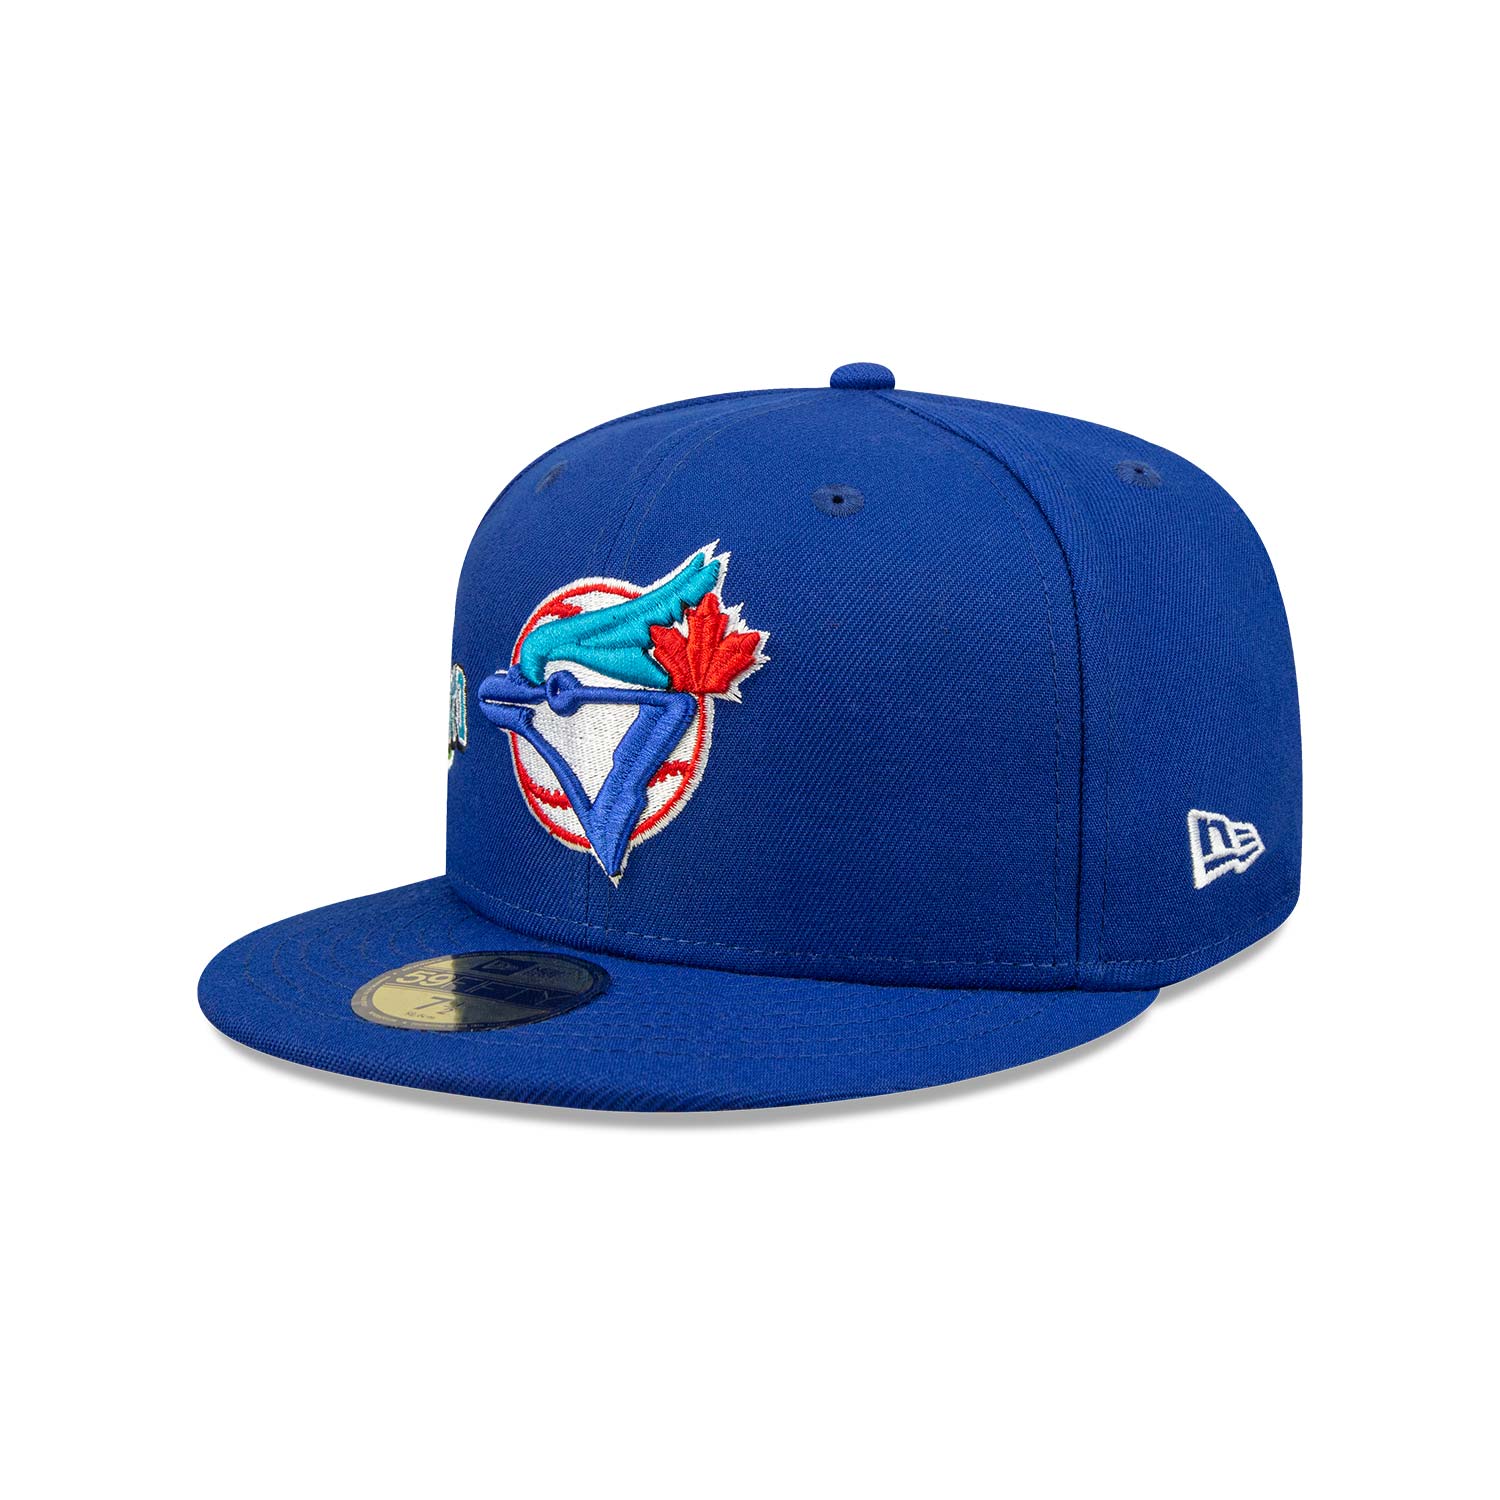 Official New Era Stateview Toronto Blue Jays Blue 59FIFTY Fitted Cap ...